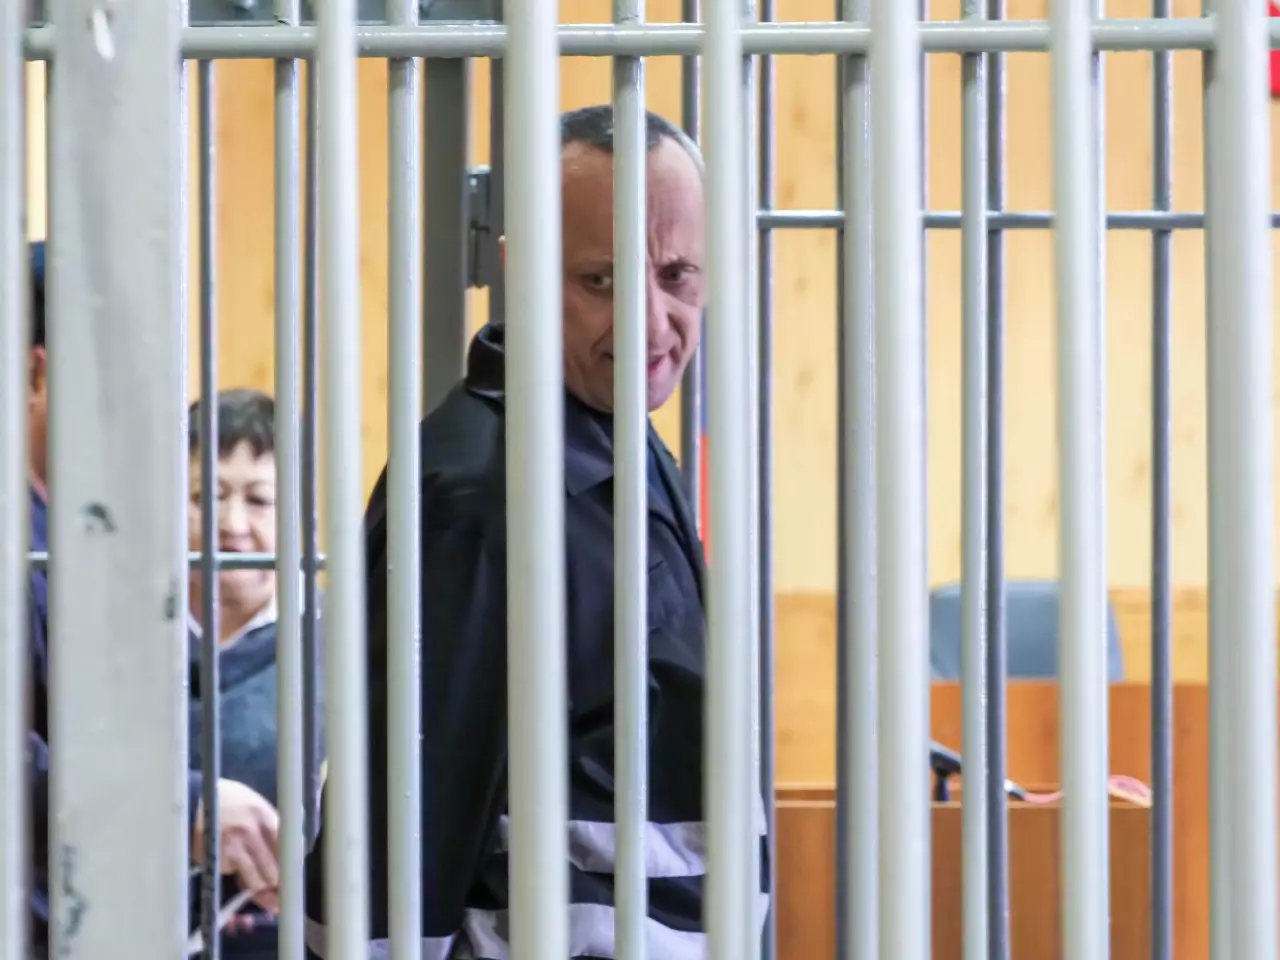 Popkov taunted police by refusing to reveal the total of women he killed.